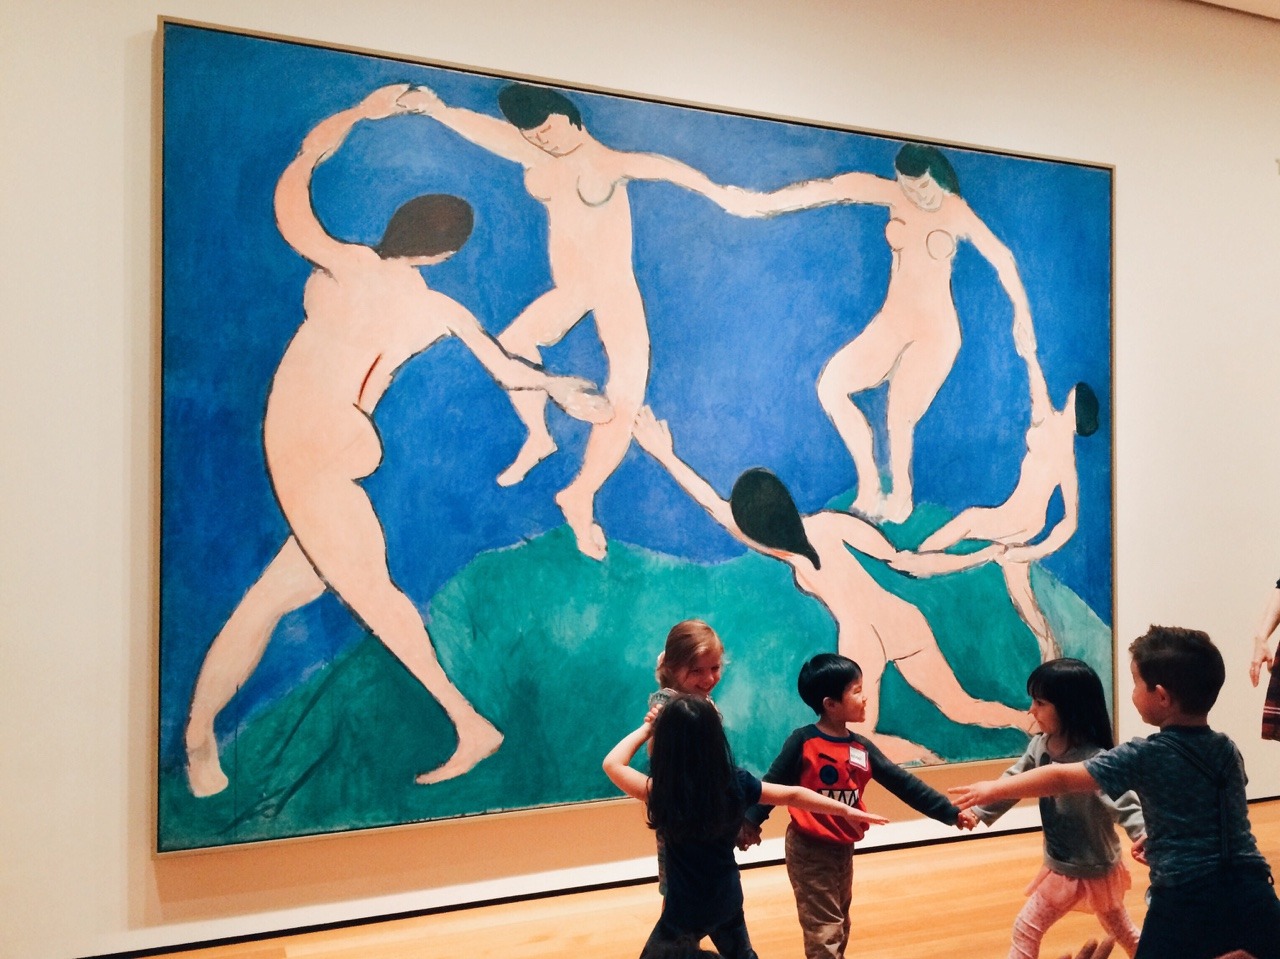 smoke-stungeyes: These little kids at MoMA were trying to recreate this piece of